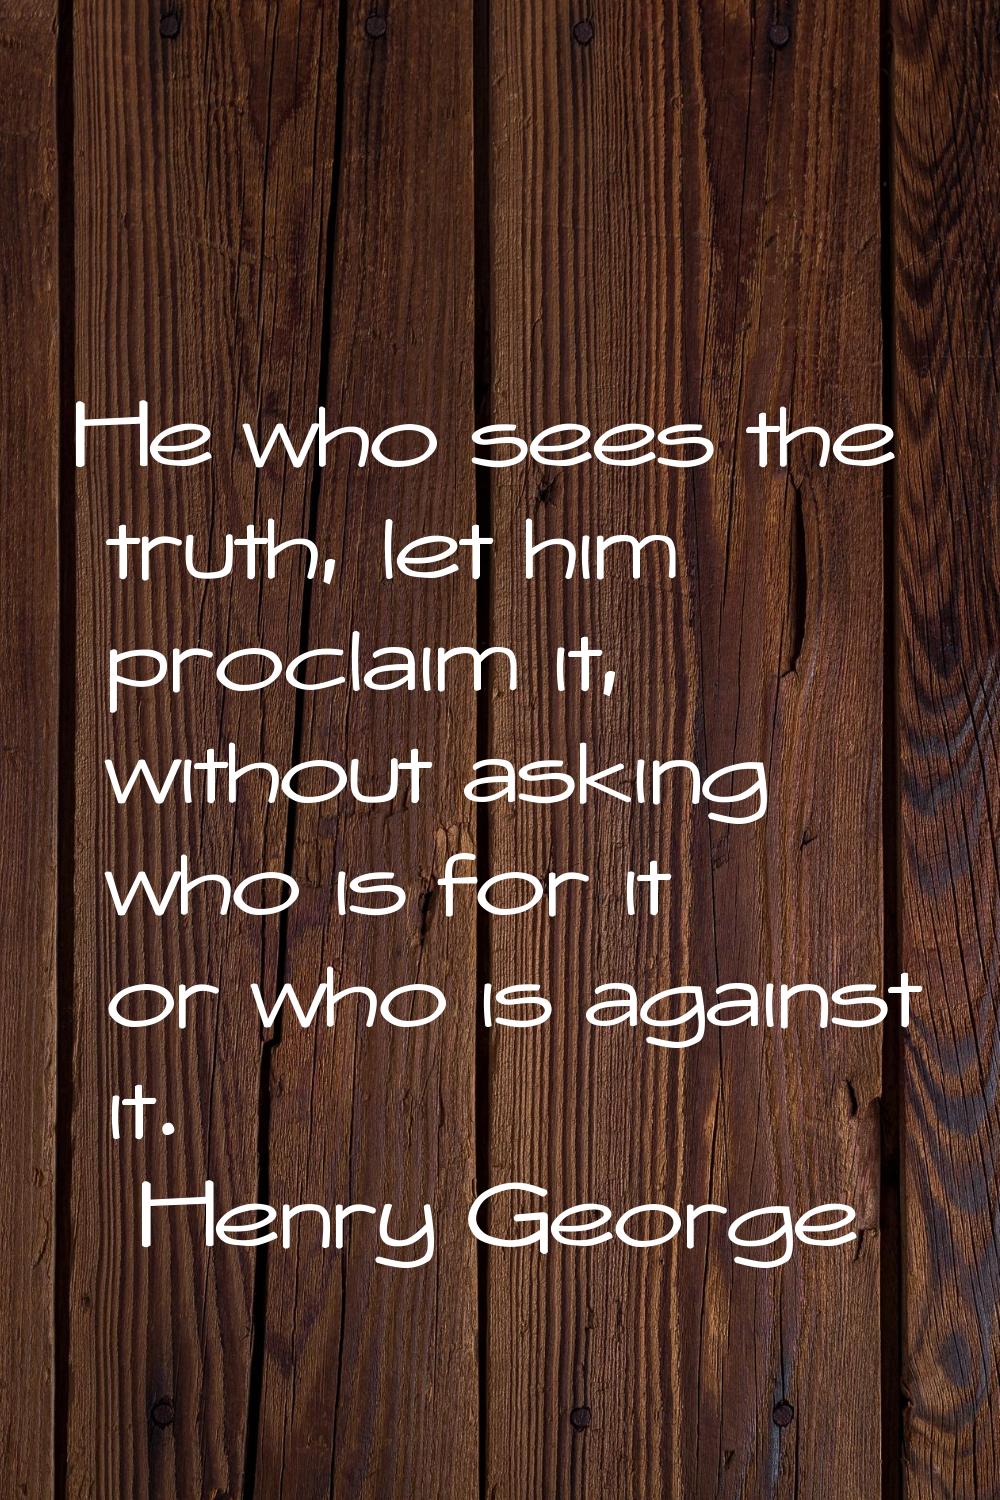 He who sees the truth, let him proclaim it, without asking who is for it or who is against it.